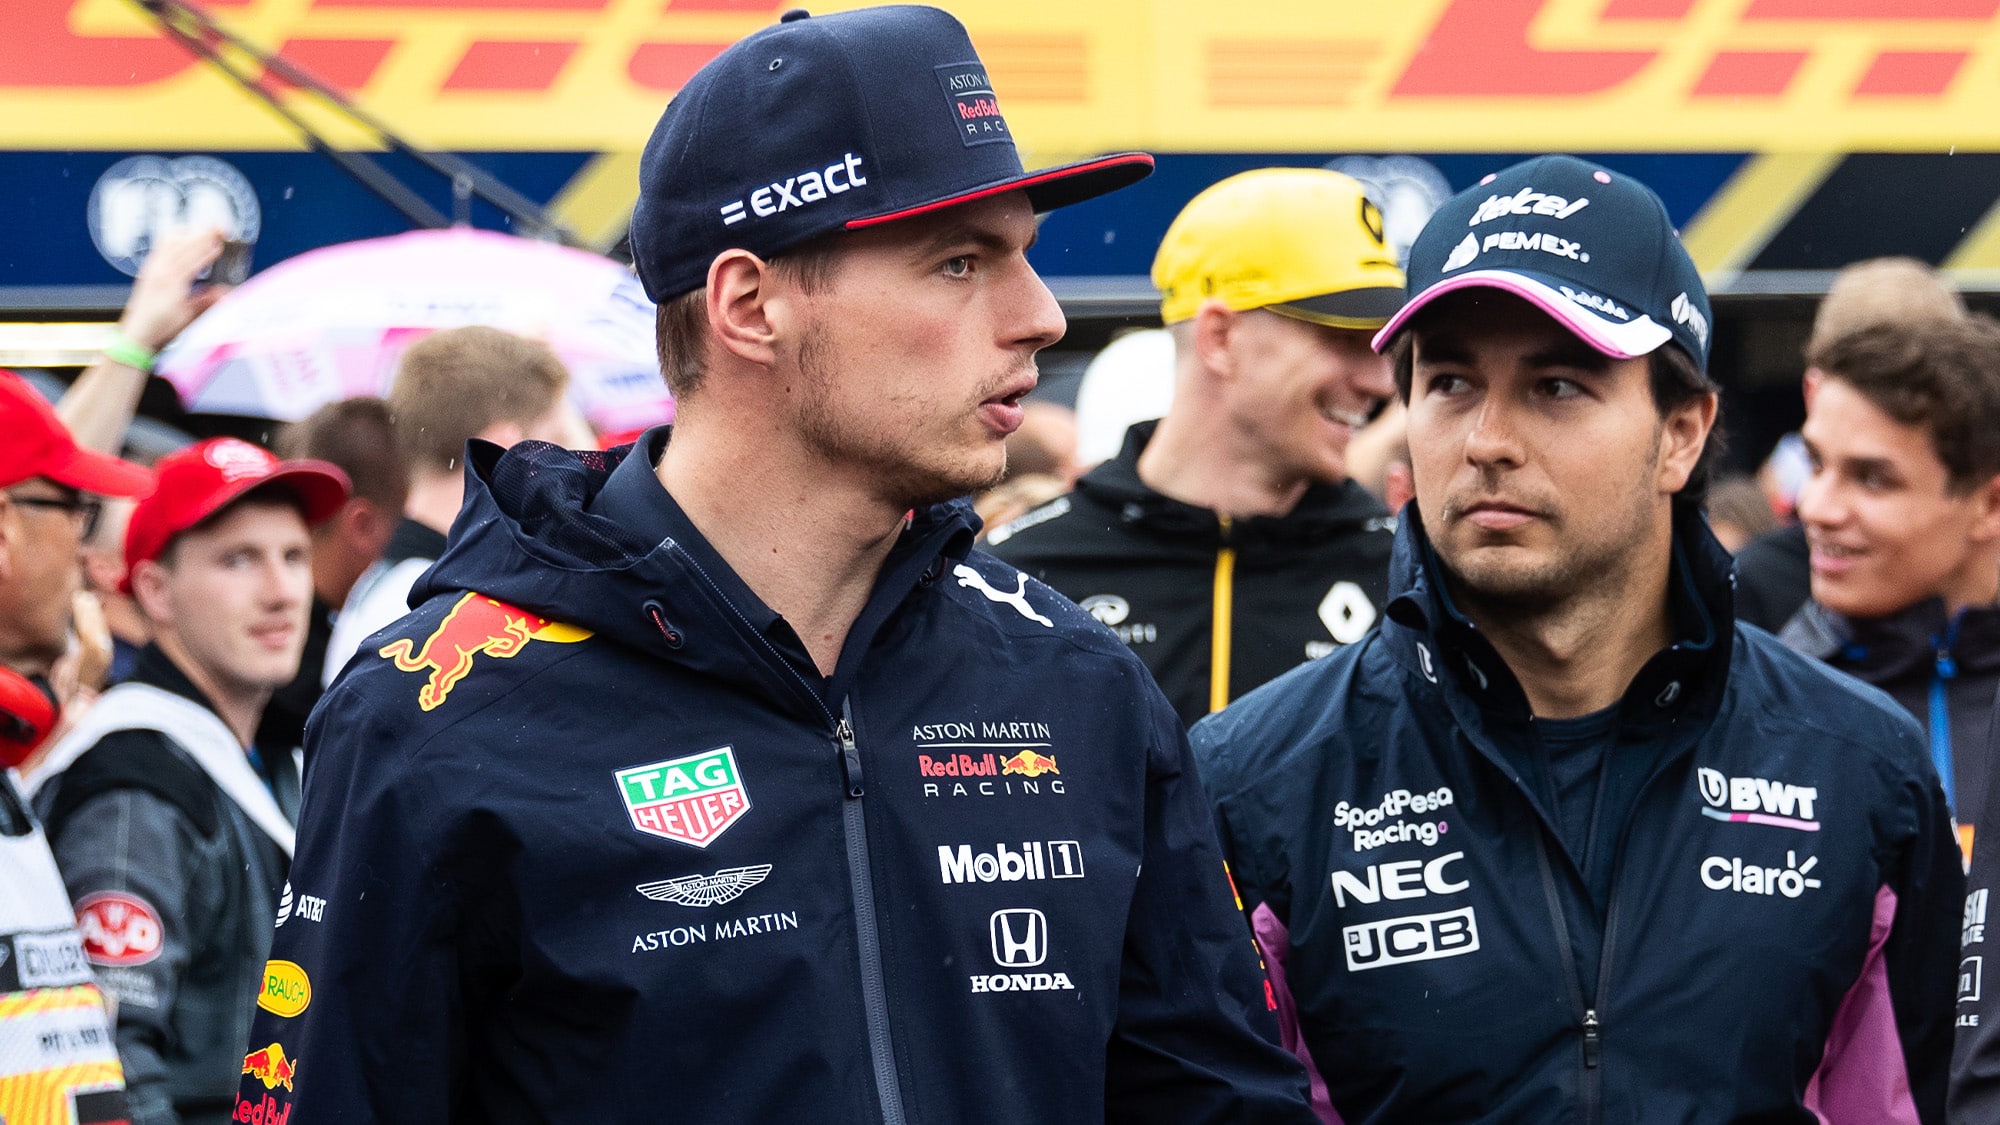 2021 F1 driver line-up confirmed teams list for next season